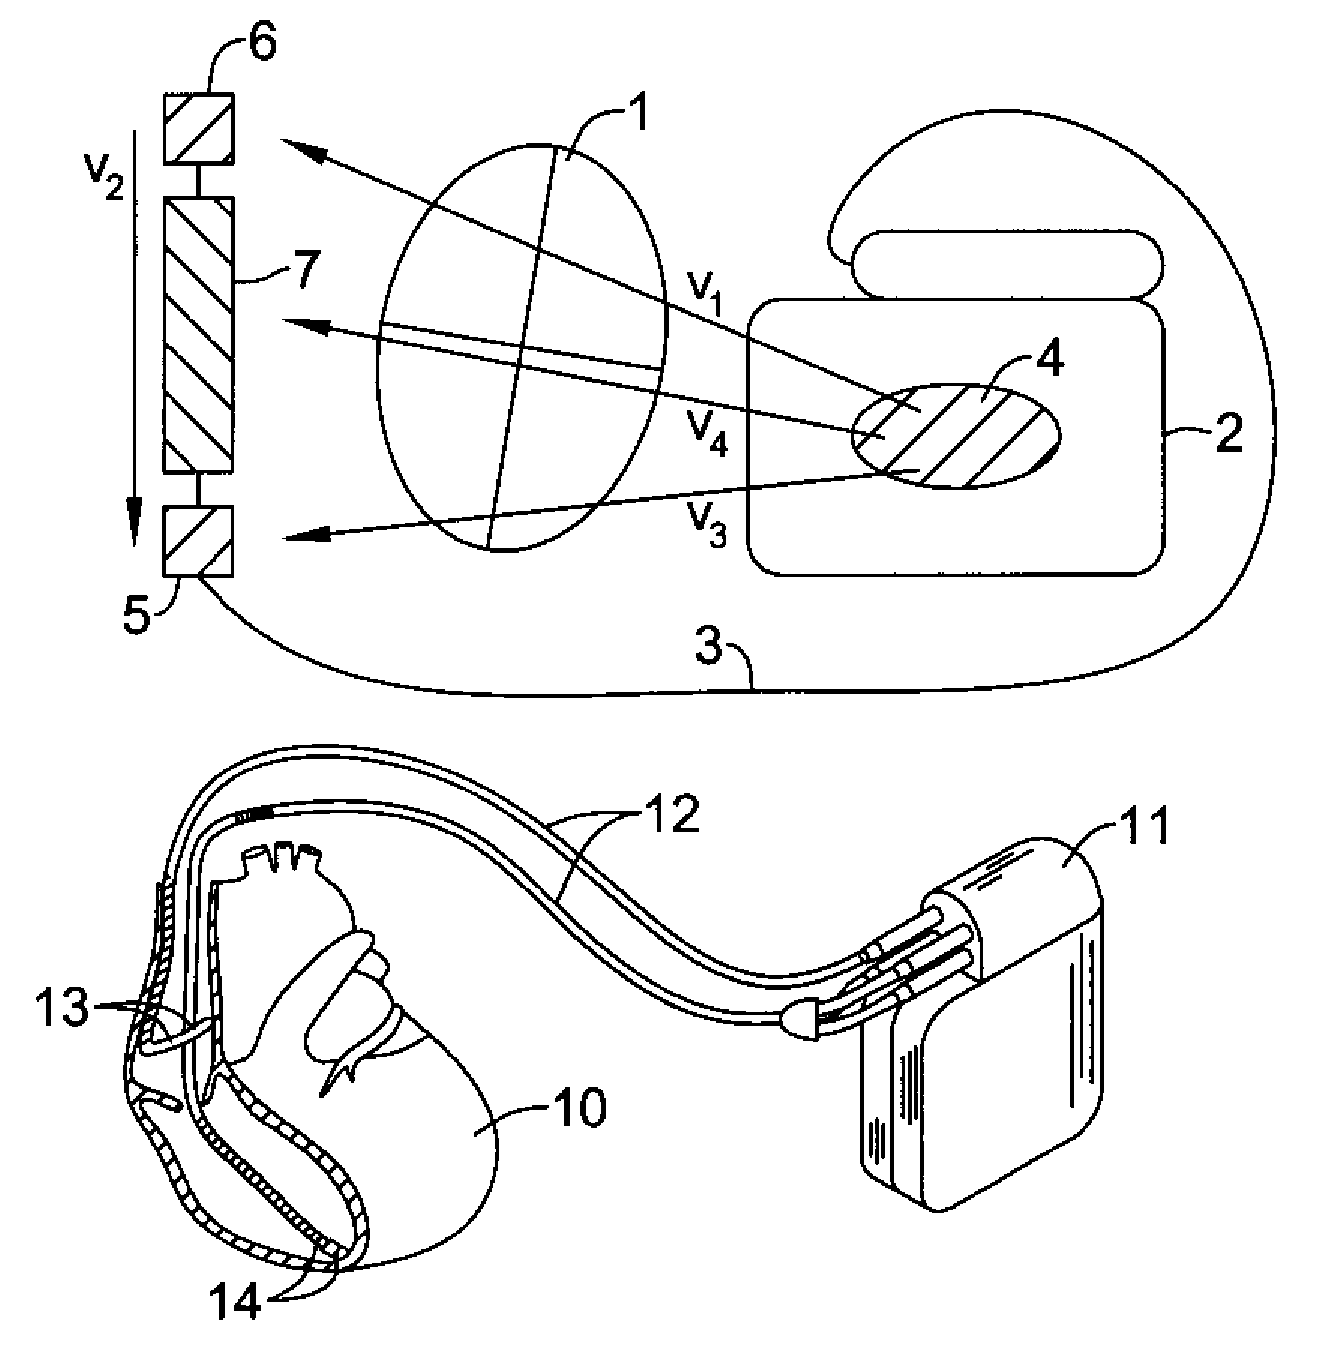 Method and devices for performing cardiac waveform appraisal